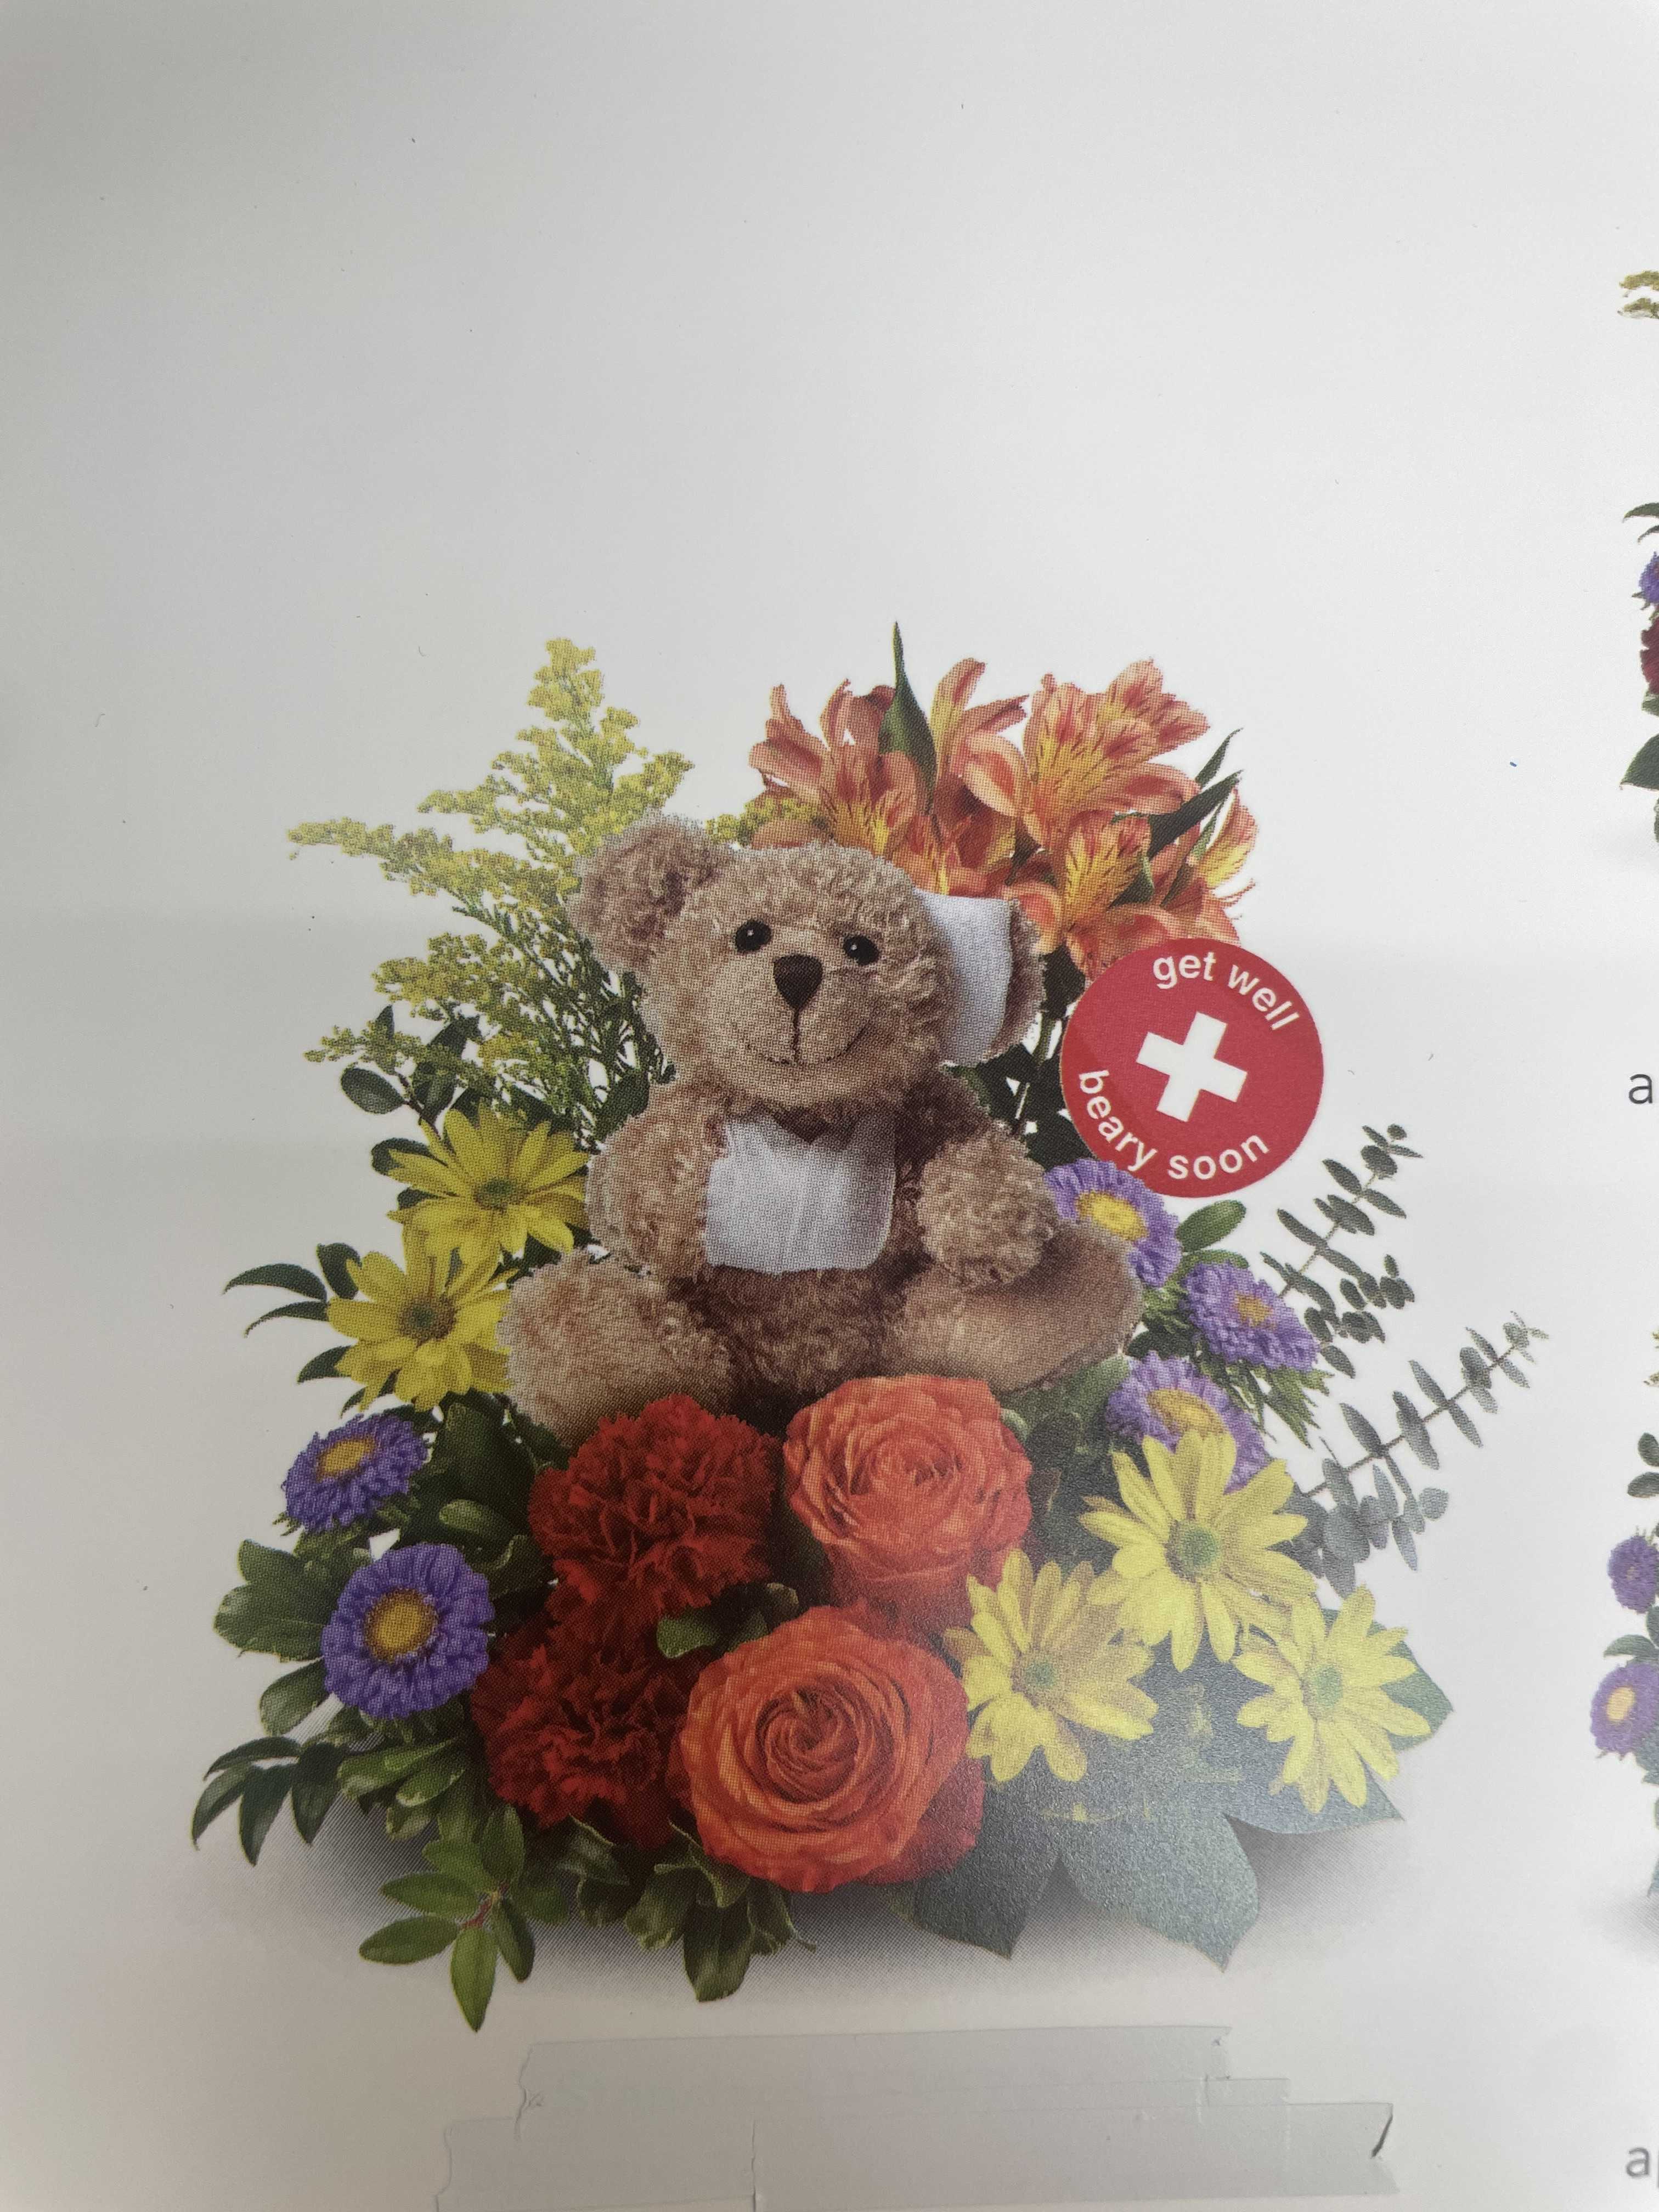 Get Well and Sorry Bouquet - This special bouquet can include a Teddy Bear to bring a smile for any occasion.  Floral arrangement has standard of 59.99 plus the cost of Teddy Bear.  Brighten someone's day with this beautiful arrangement. It can be used for I AM Sorry, BABY Showers, or even Get Well. Floral arrangement and Teddy Bear are sold separately.  Different Teddy Bears can be arranged as per customer request.  Custom prices are higher, please call the store for your custom arrangement.  